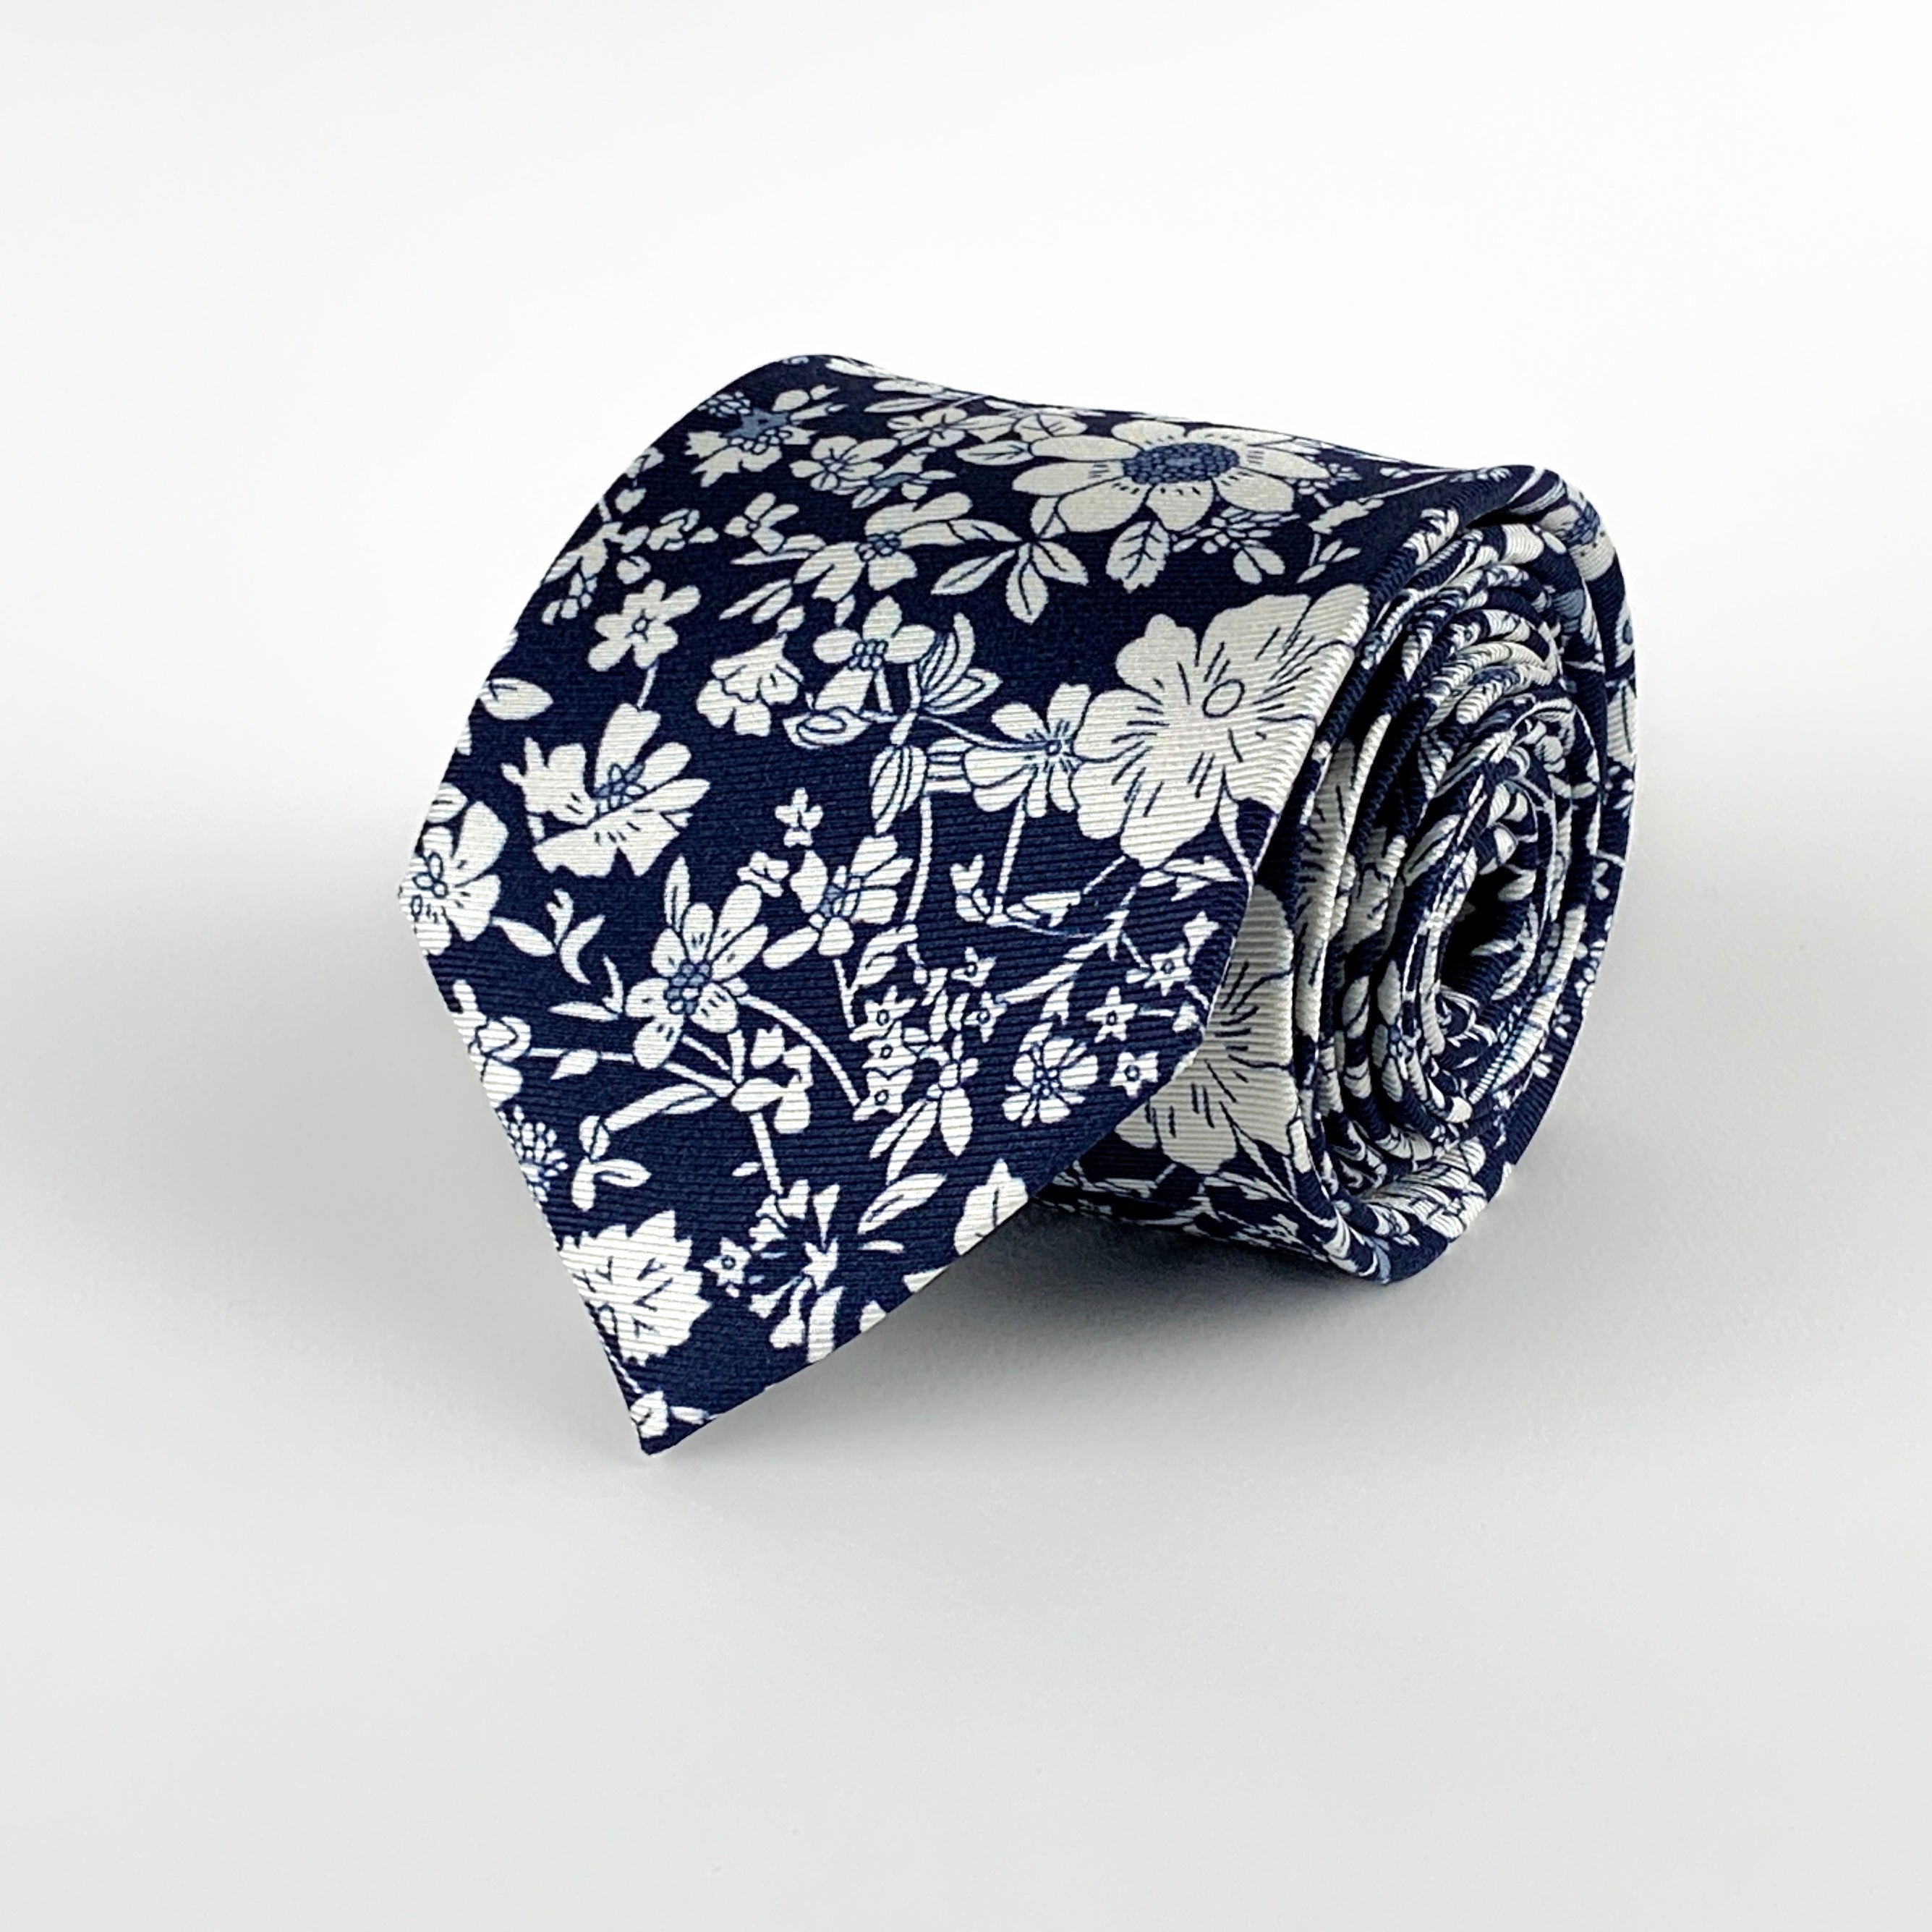 Navy blue mulberry silk twill tie with a white floral print rolled and placed on a white background